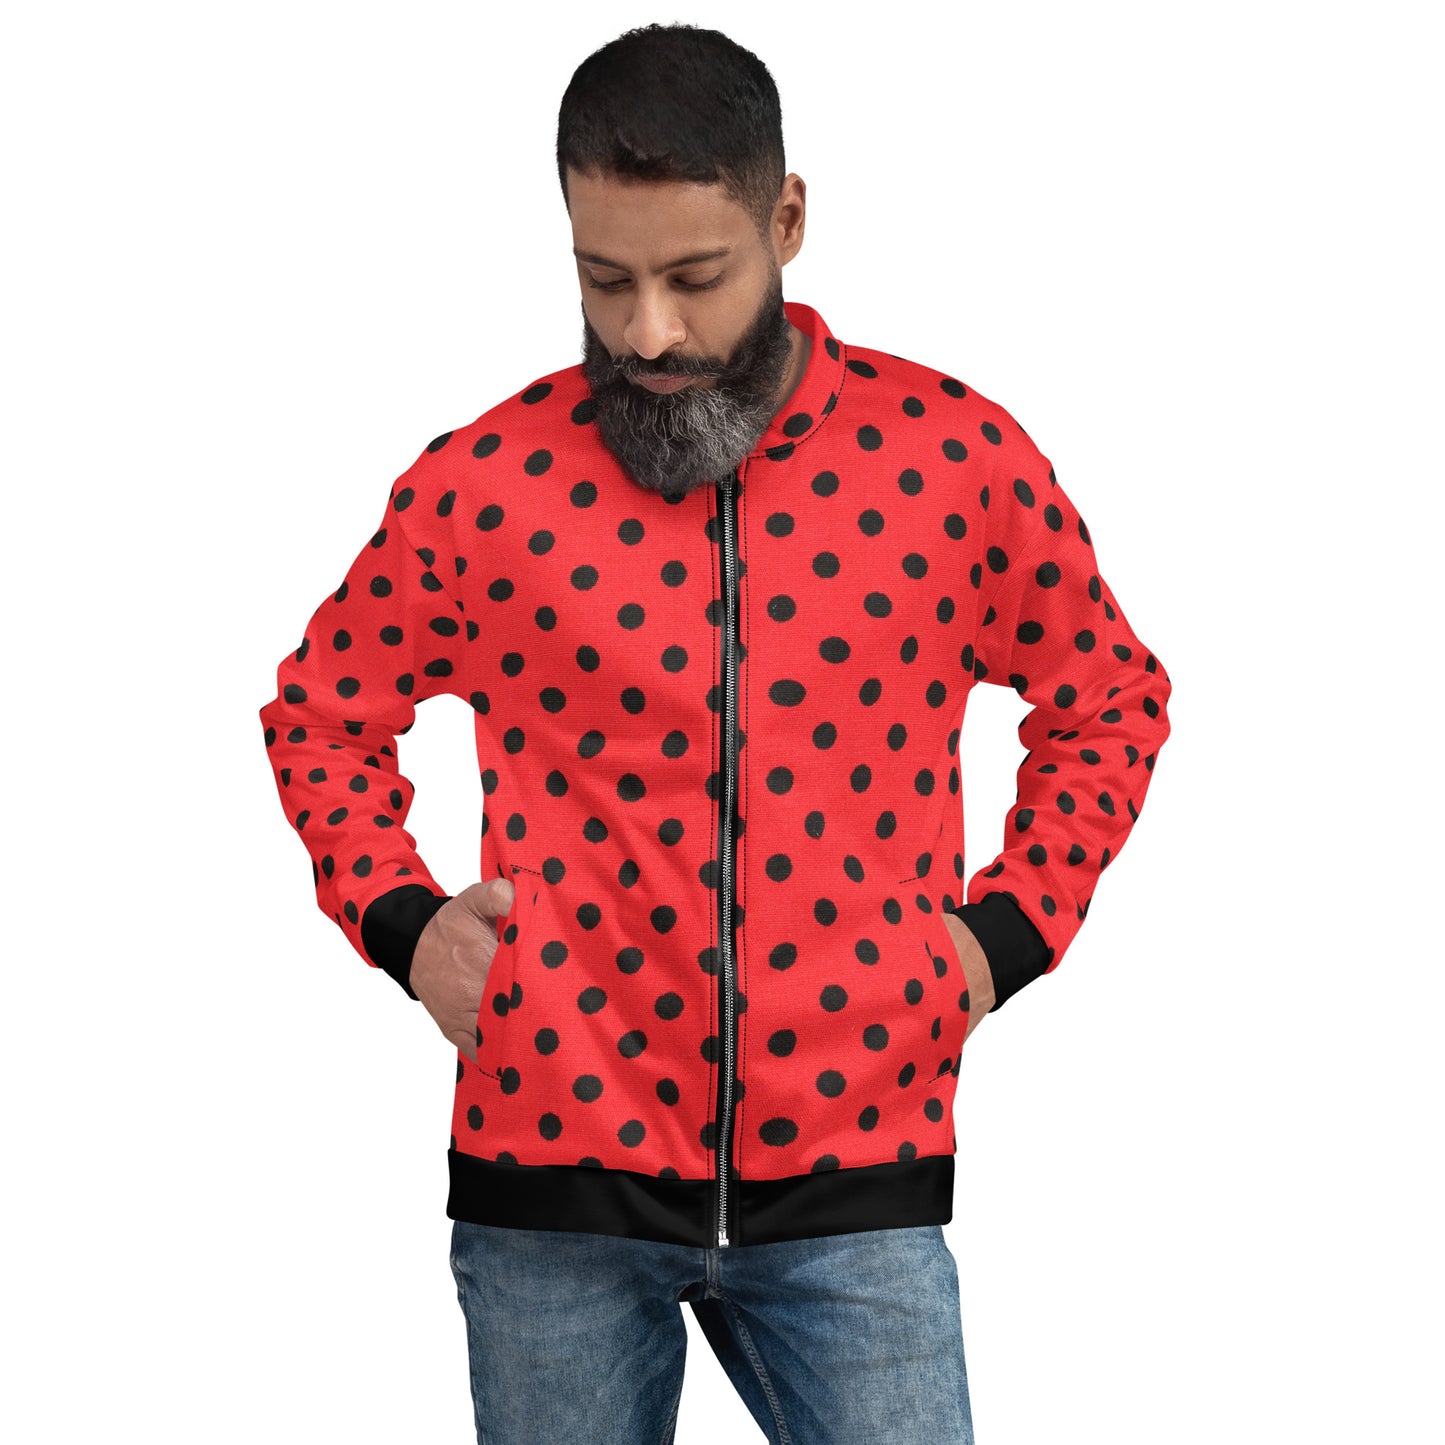 ManChic Red Bomber Jacket with Black Polka Dots-Men's